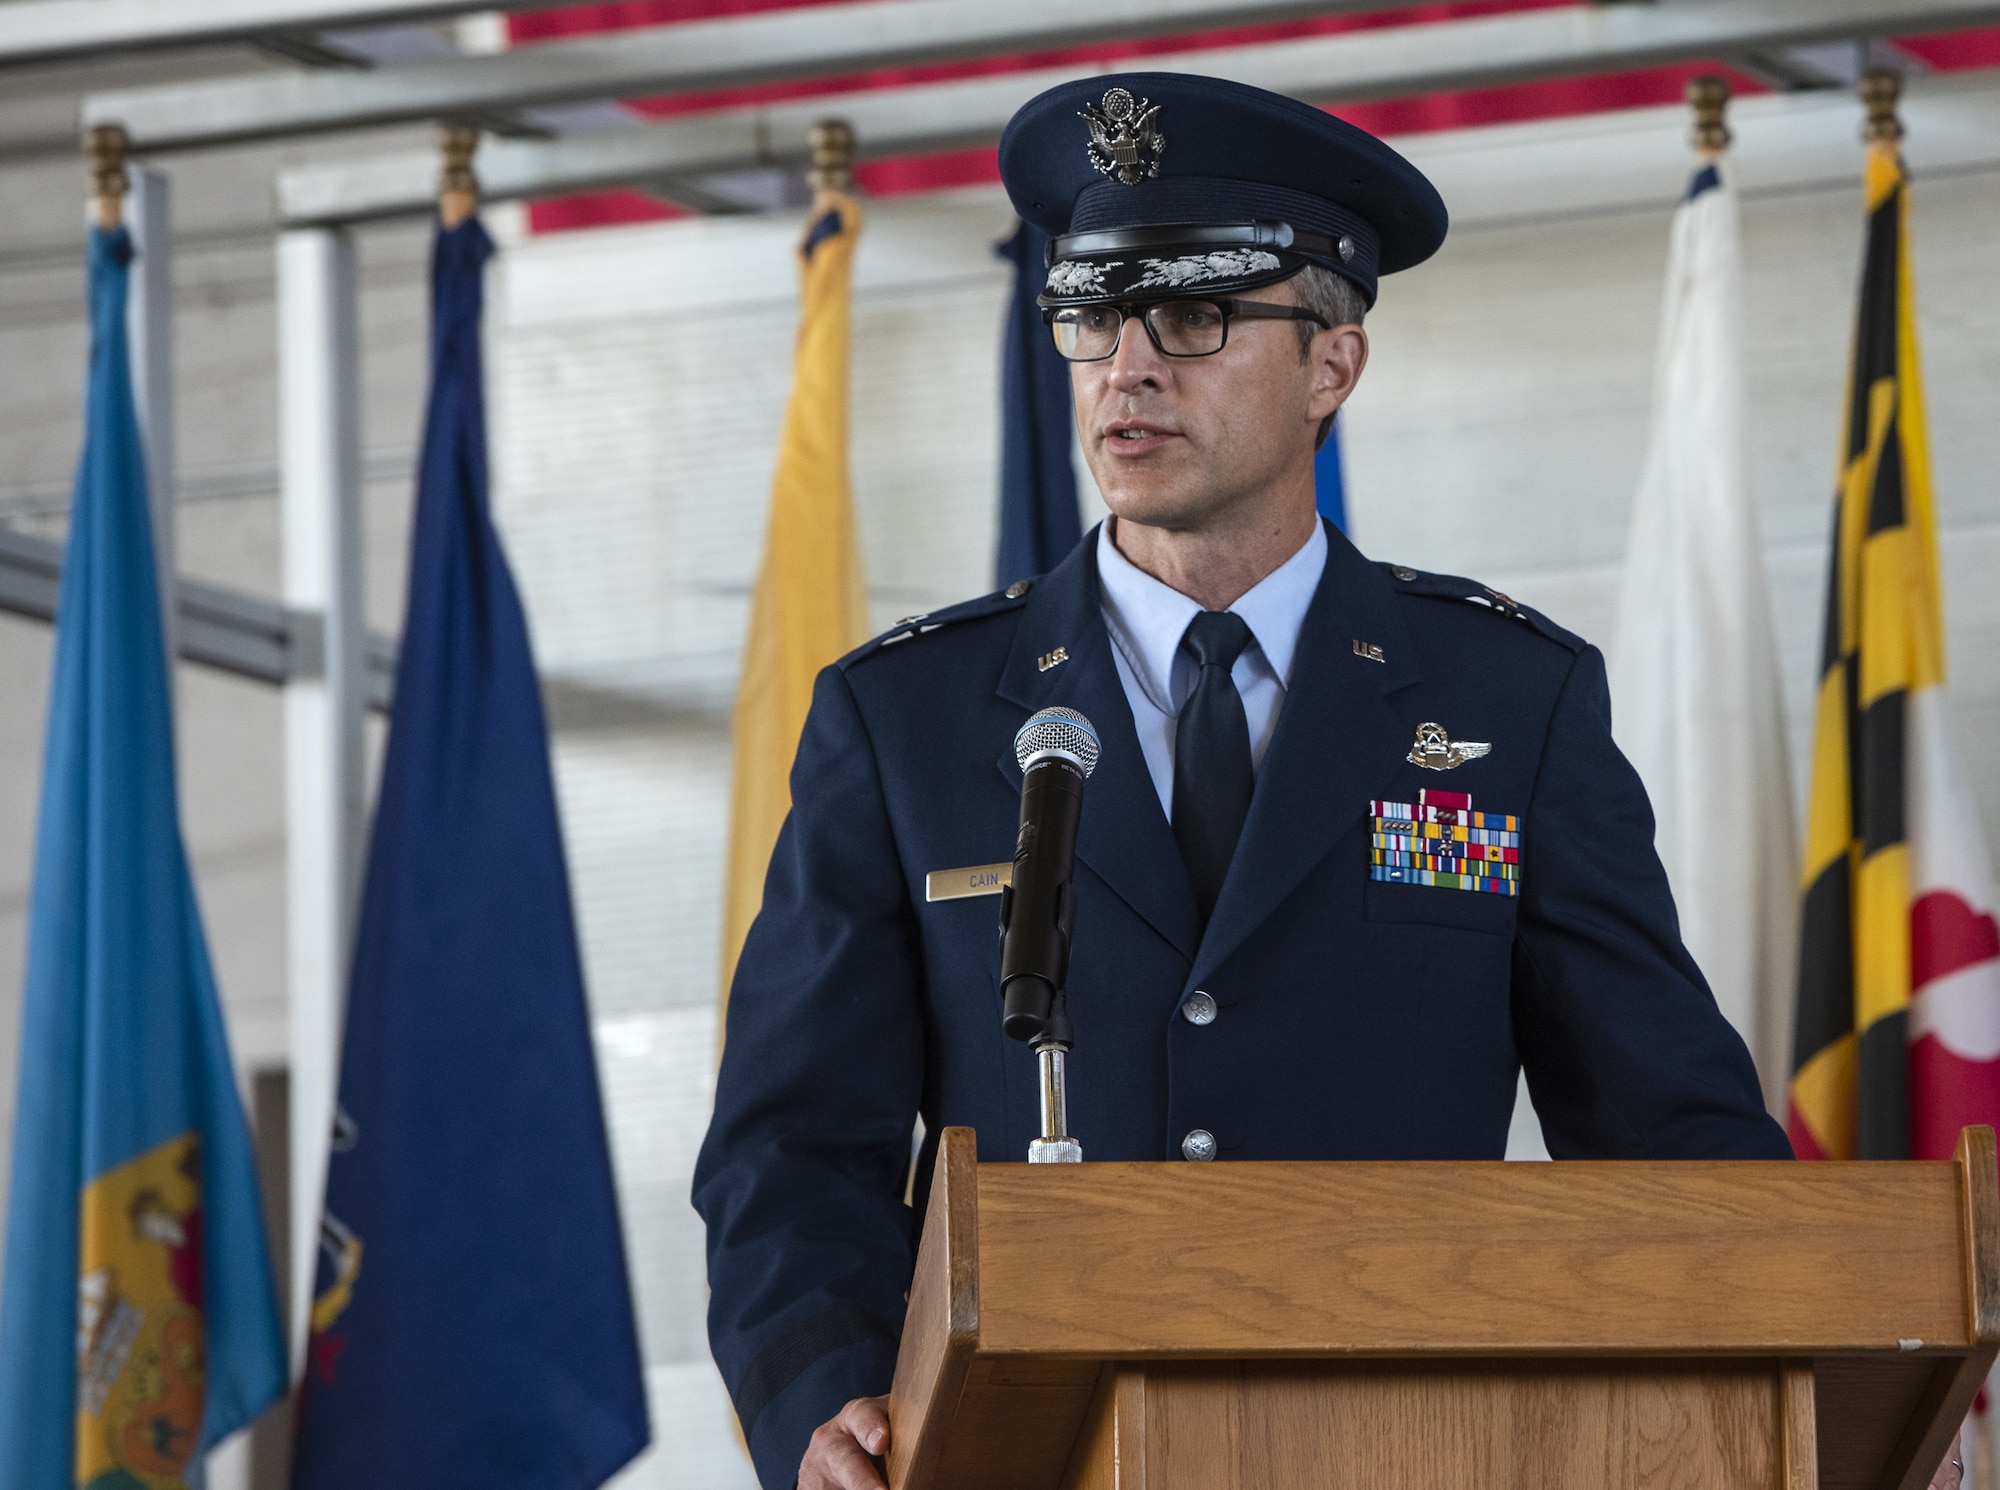 The 96th Test Wing welcomes new commander, Brig. Gen. Scott Cain during a change of command ceremony July 2.